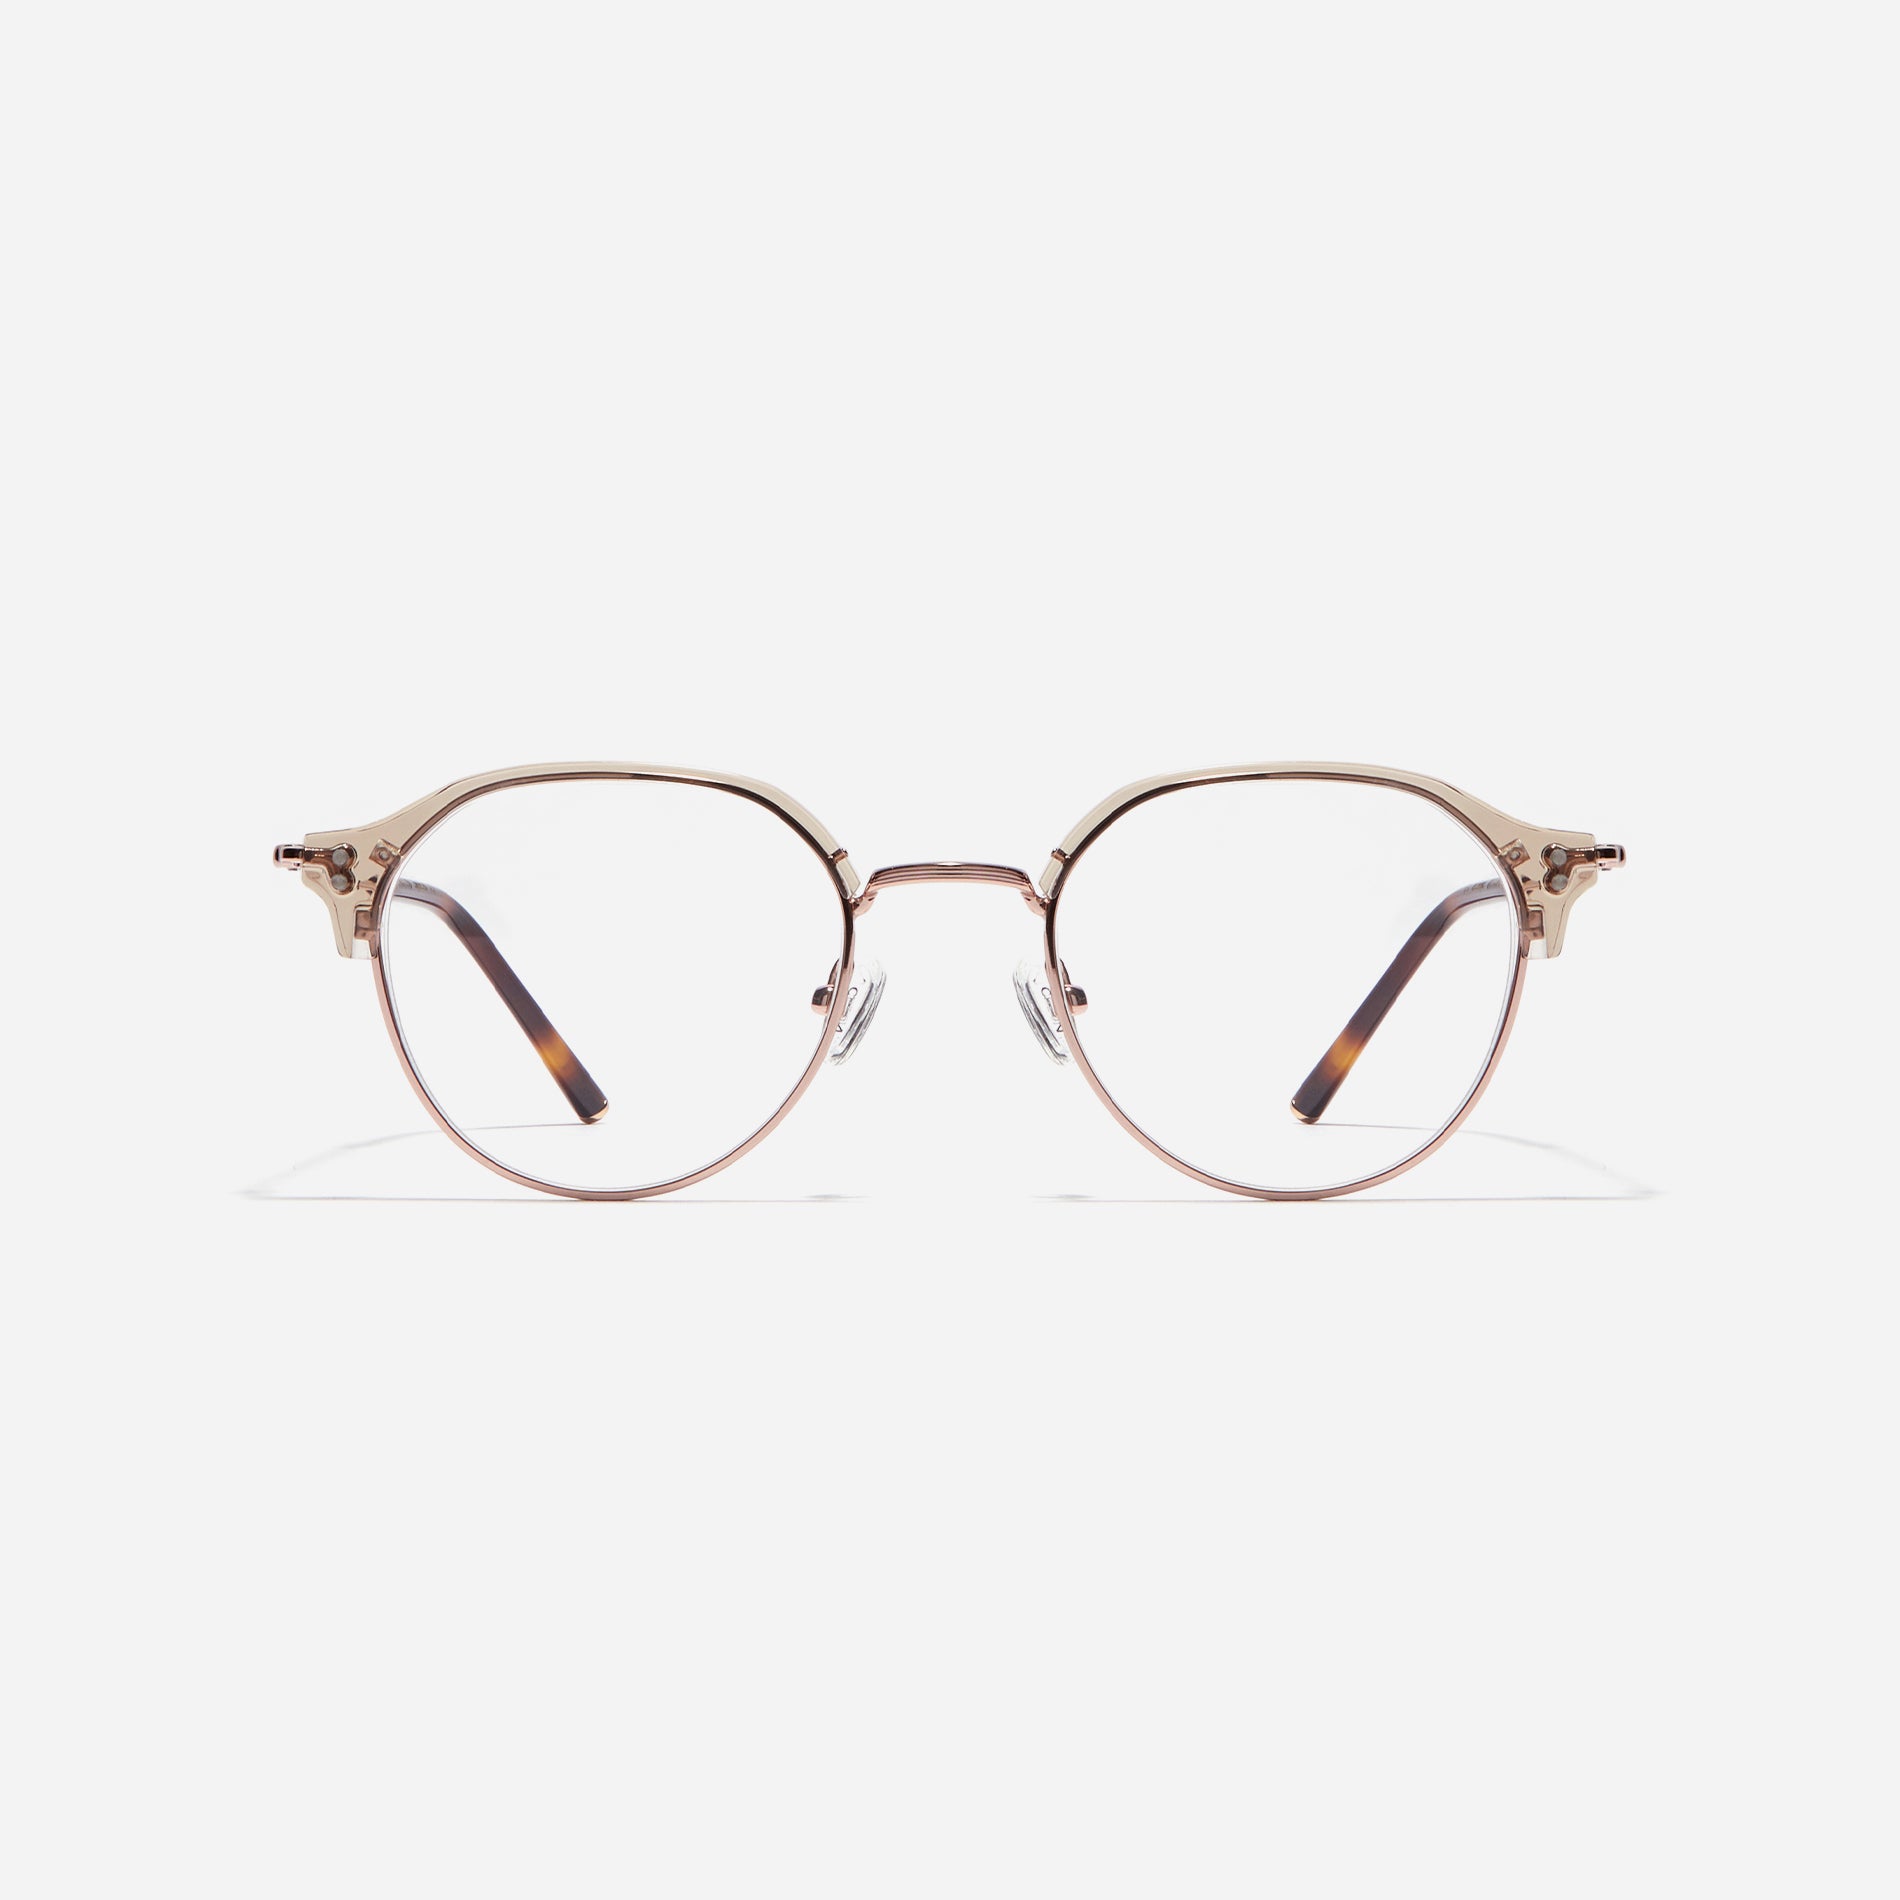 Polygonal-shaped gold-rimmed eyeglasses. The frame, constructed from bioplastic and titanium, seamlessly merges exceptional durability with an ultra-lightweight build, while stylish nose bridge lining details enhance the overall design. The B-titanium temples deliver a lightweight and comfortable fit, guaranteeing prolonged wear without any discomfort.